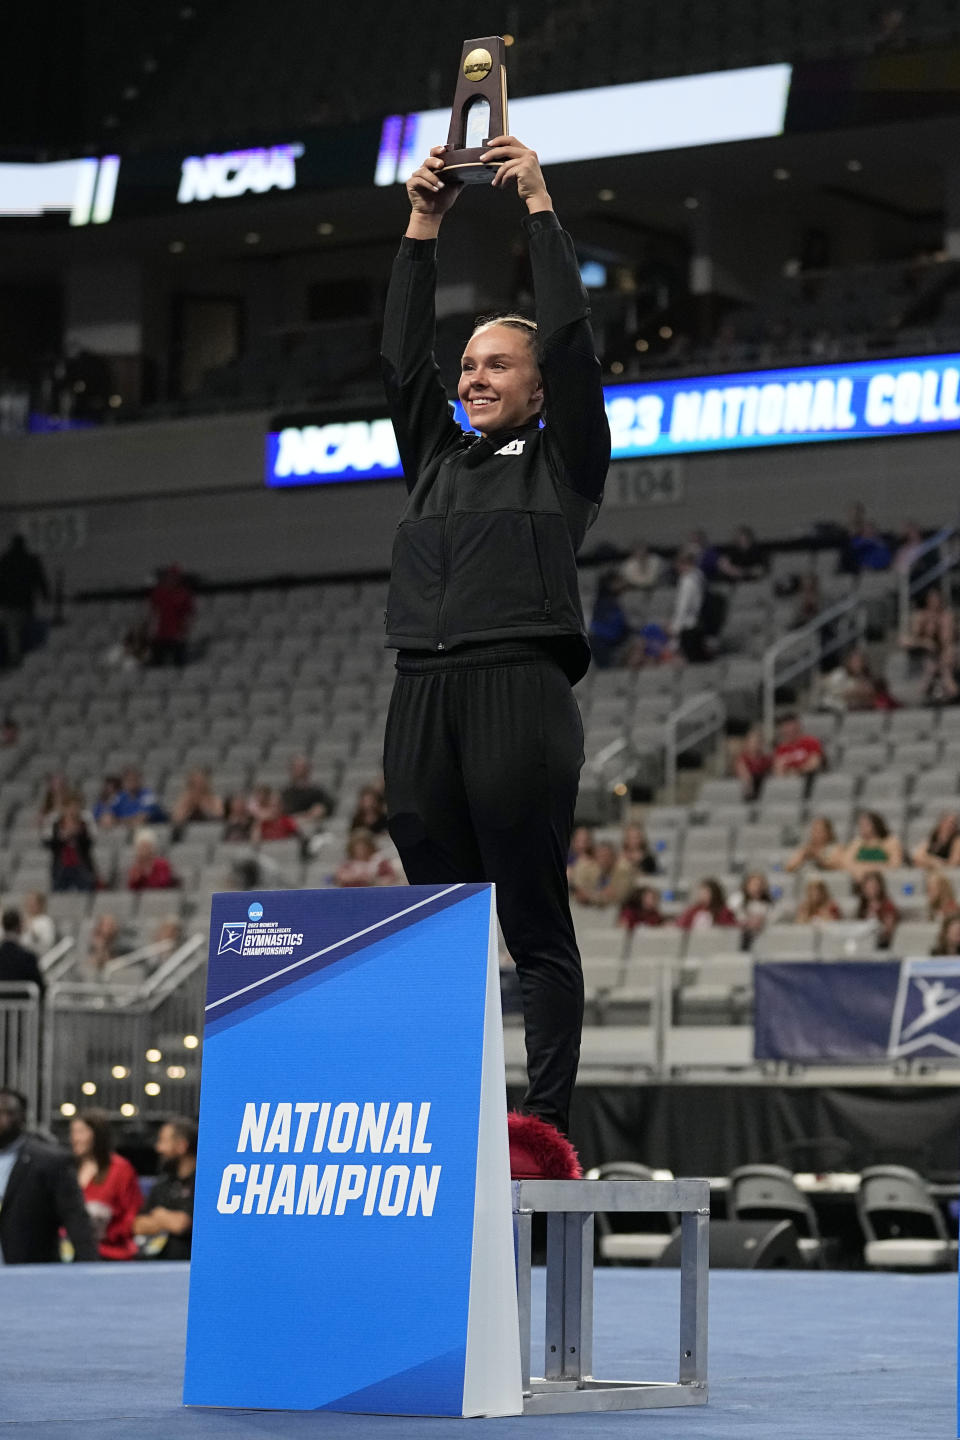 Utah's Maile O'Keefe holds up a trophy after winning the all around title in the NCAA women's gymnastics championships, Thursday, April 13, 2023, in Fort Worth, Texas. (AP Photo/Tony Gutierrez)